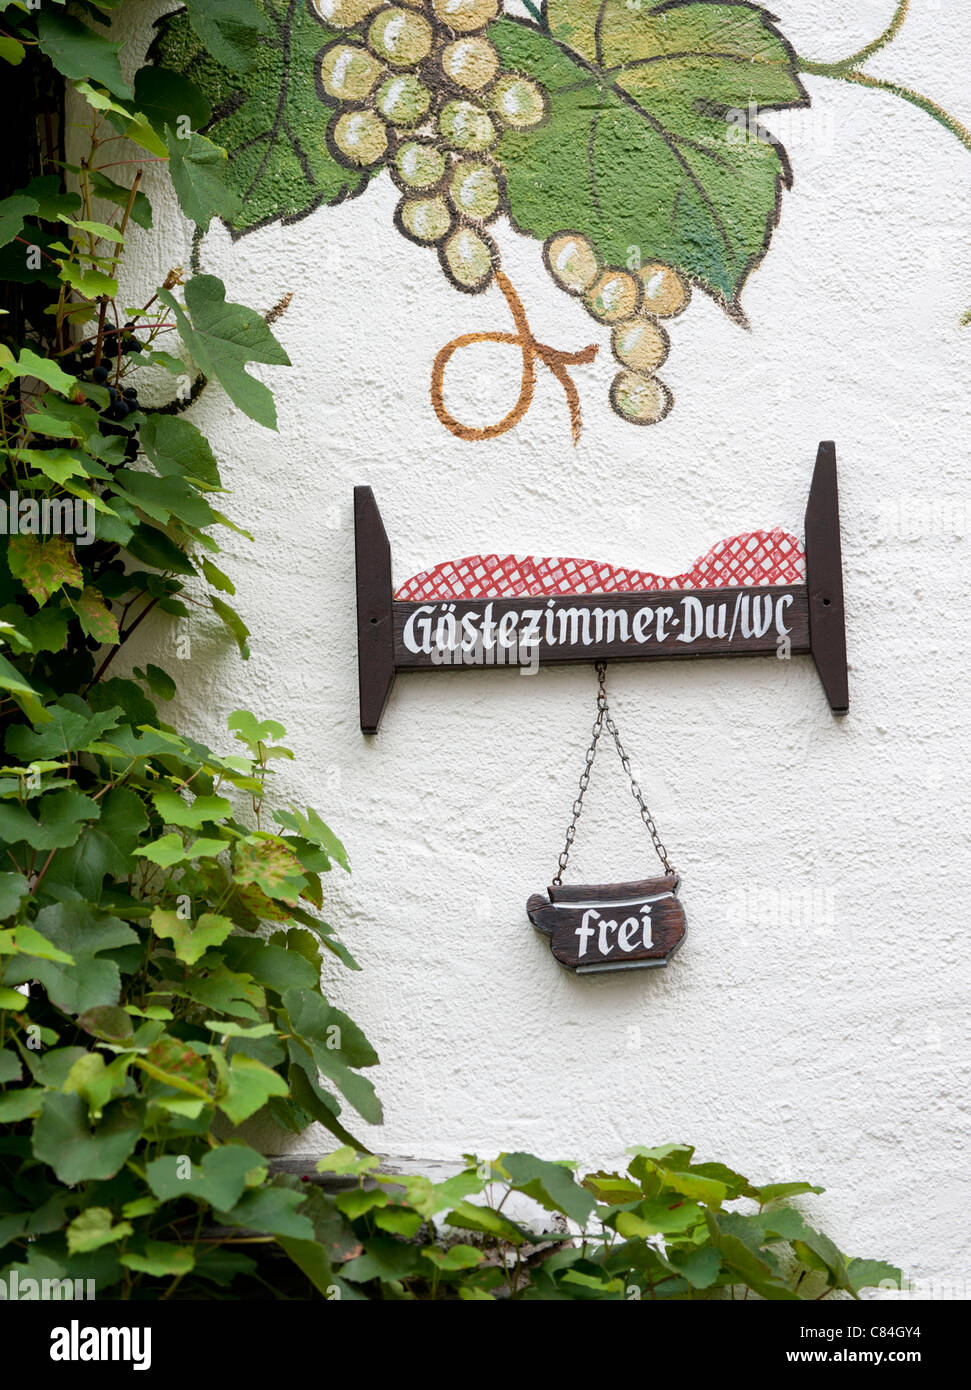 Sign outside guest house showing free rooms in Beilstein village on River Mosel in Rhineland-Palatinate Germany Stock Photo